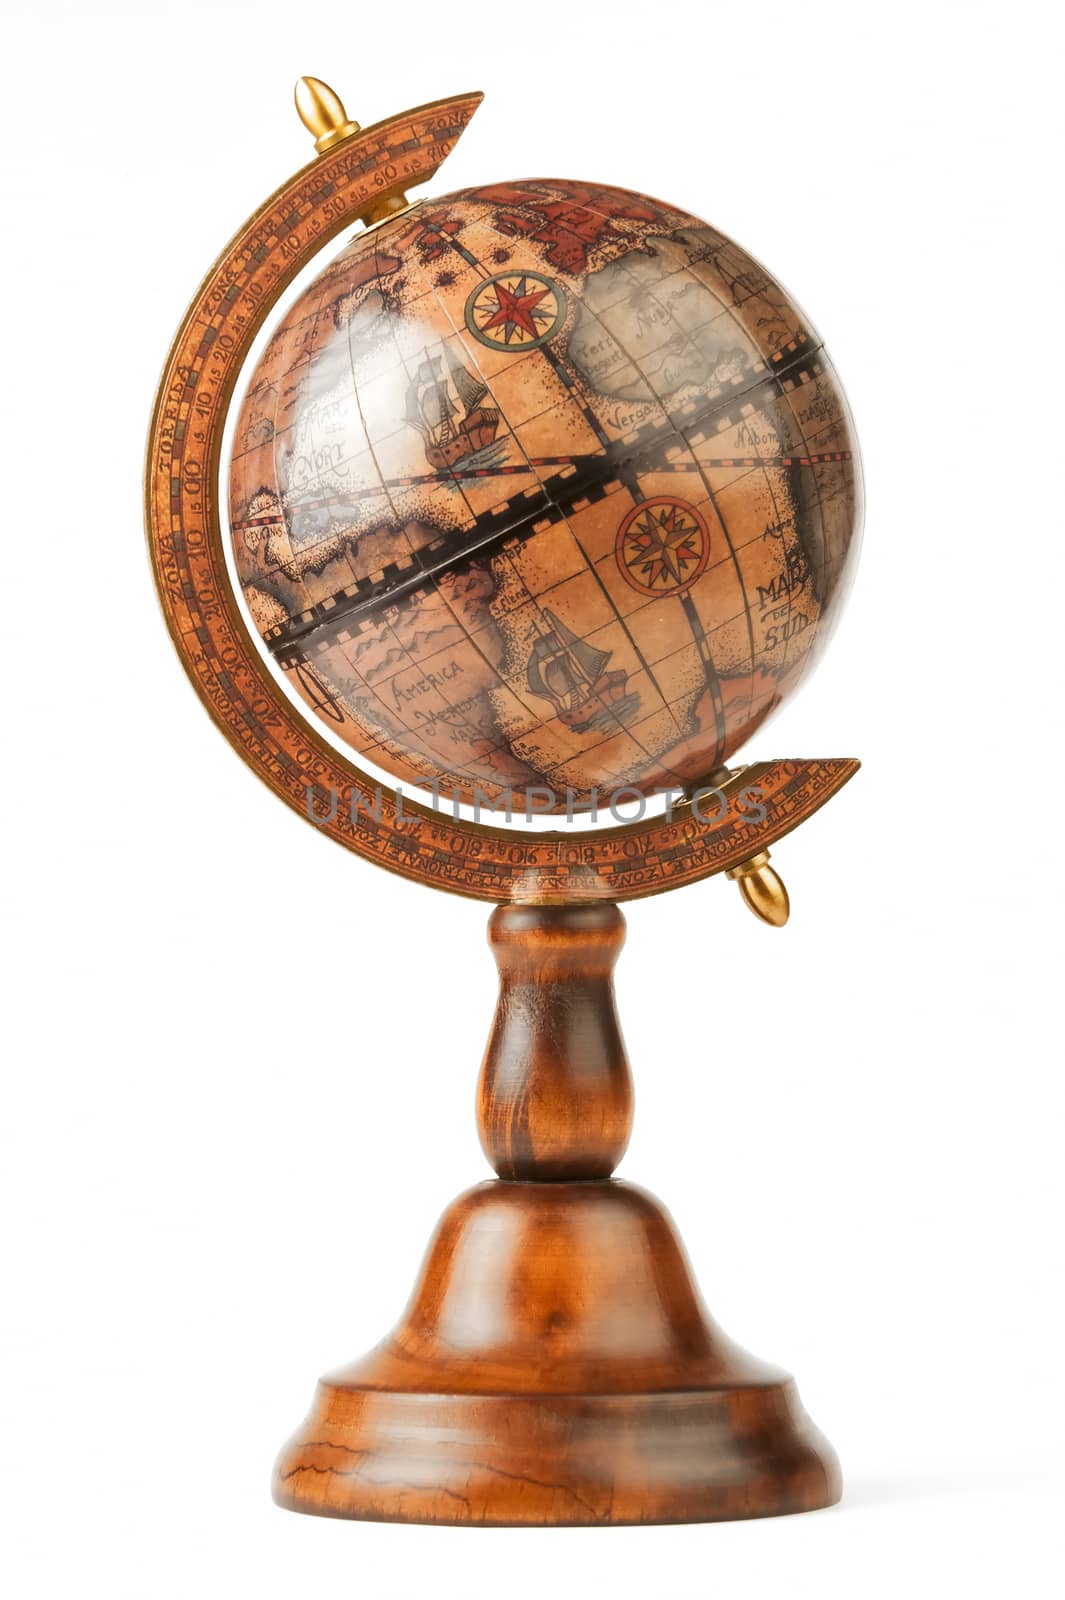 The vintage globe, separately on a white background by kosmsos111